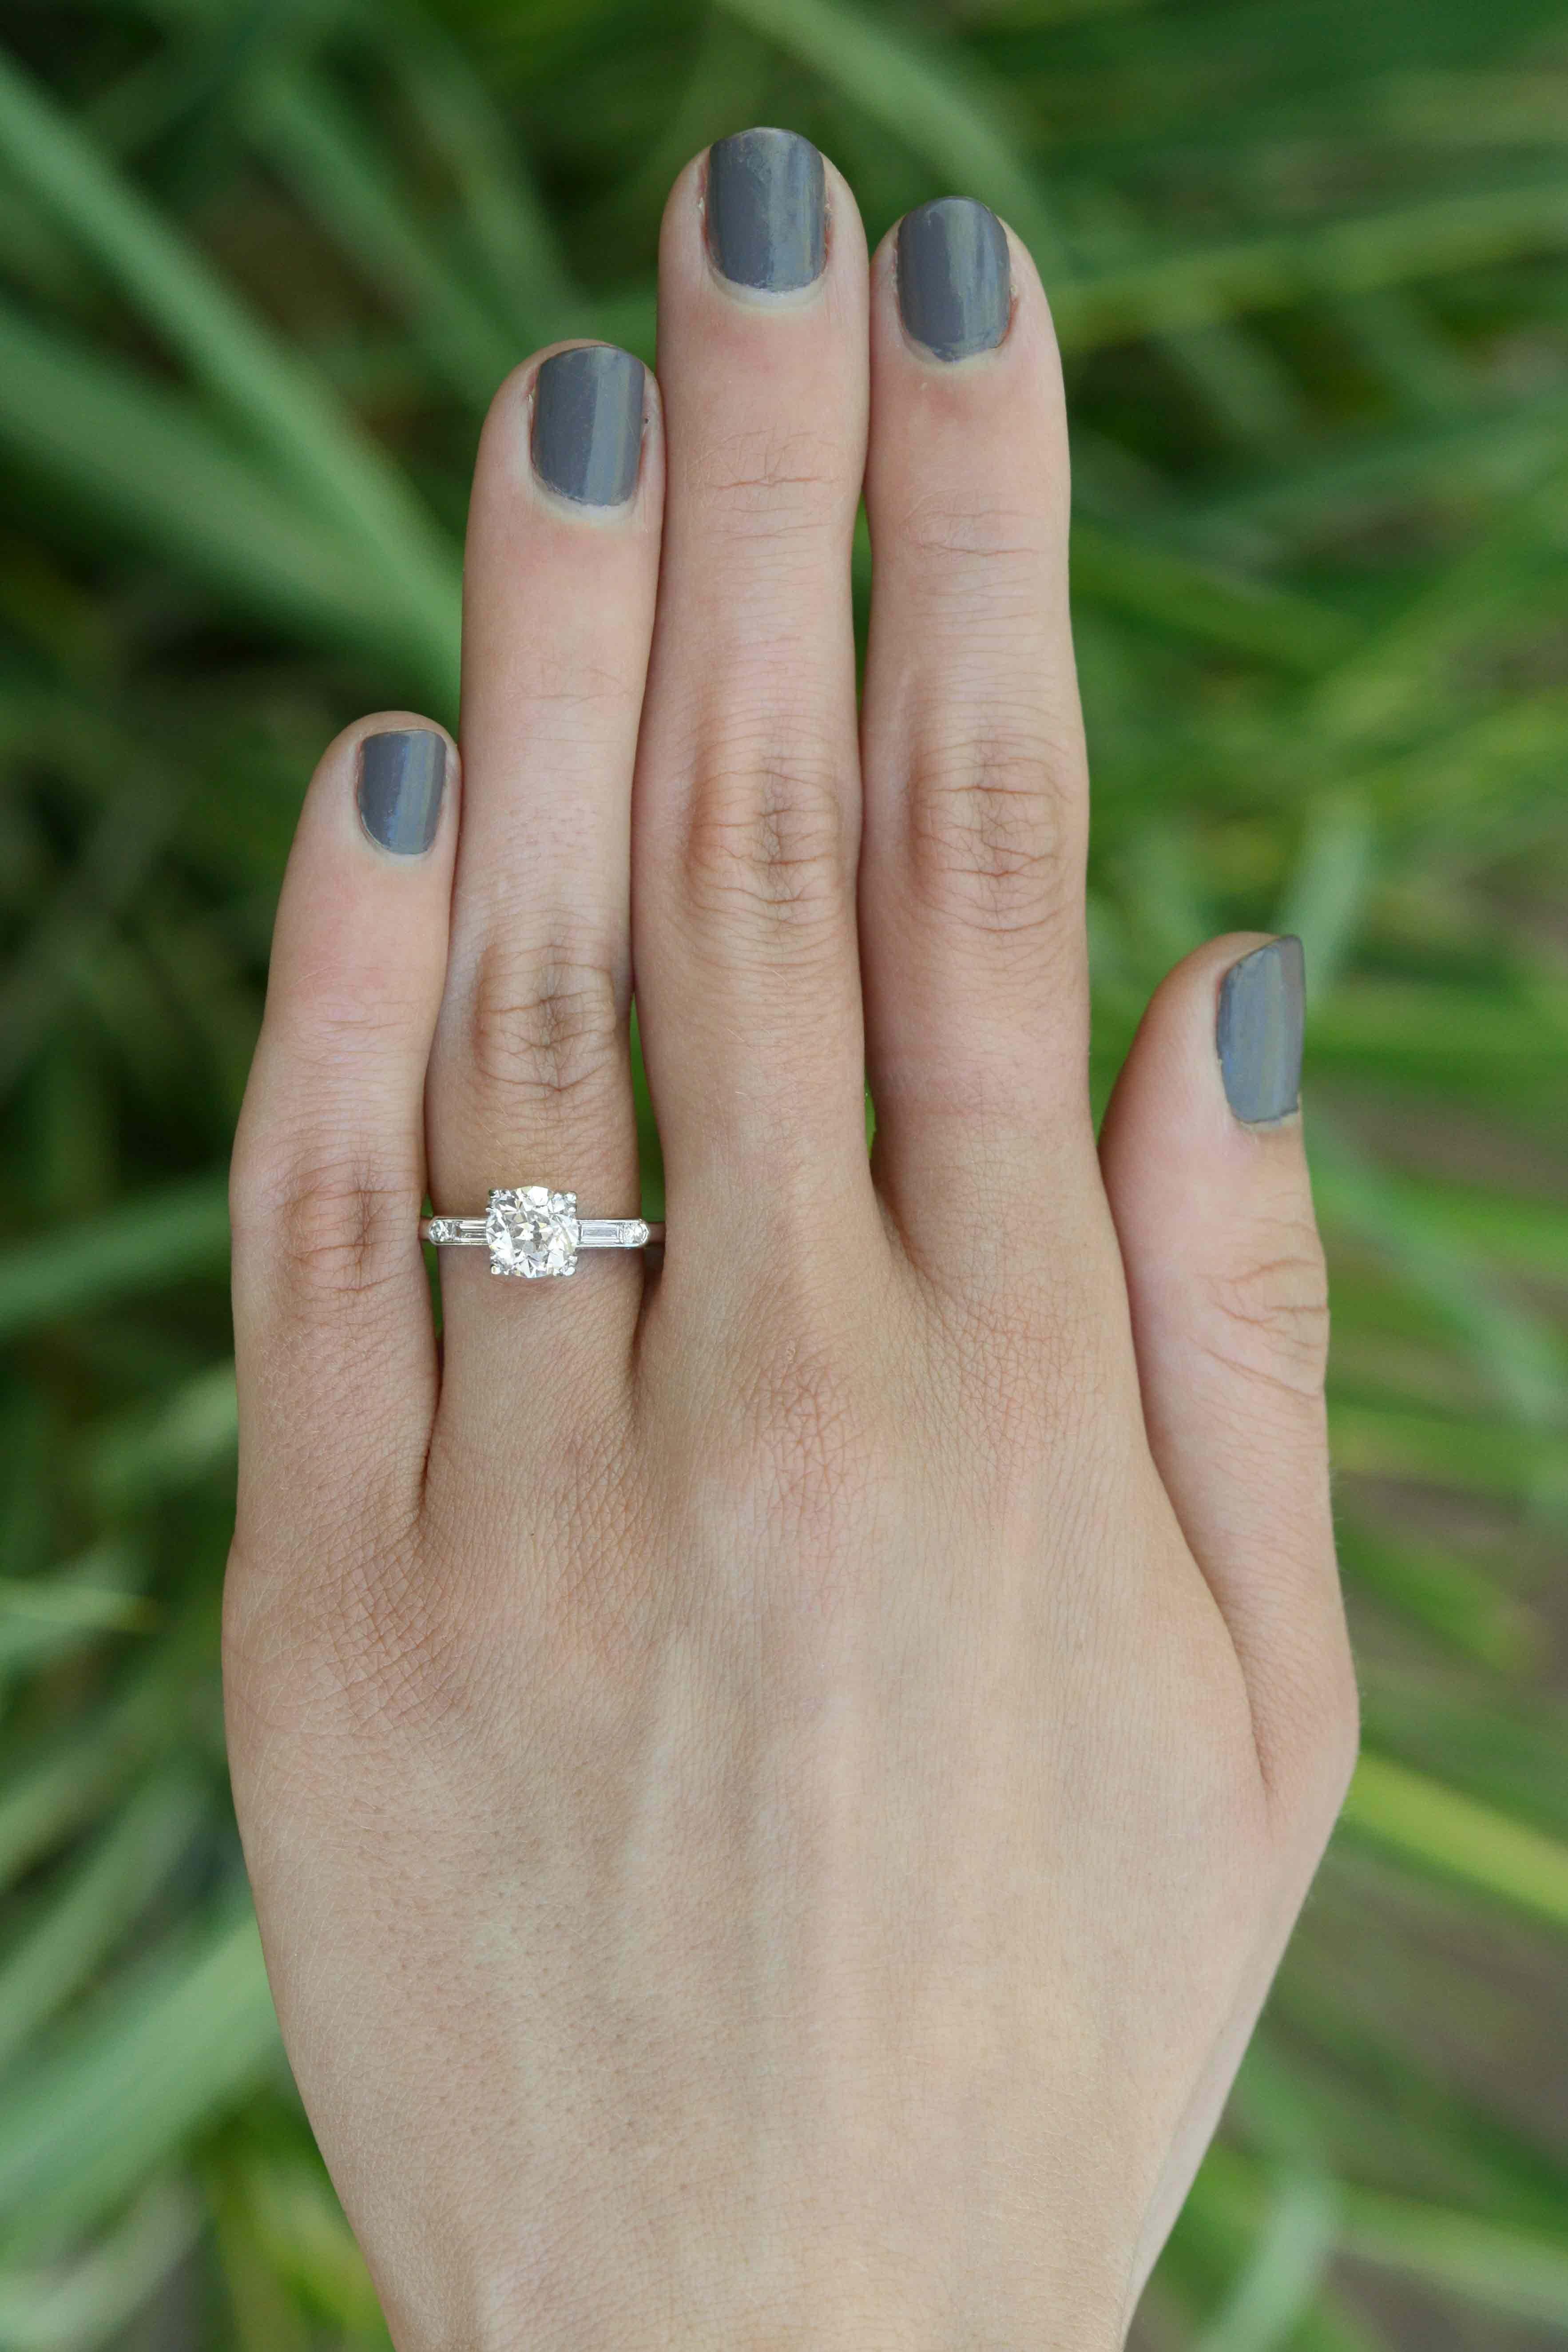 The Colorado Art Deco diamond solitaire is a stunning engagement ring. The classic, streamlined platinum setting is simple and elegant, embraced by an icy baguette and round sparkler on it's shoulders. A gorgeous chunk weighing 1.31 carats, the